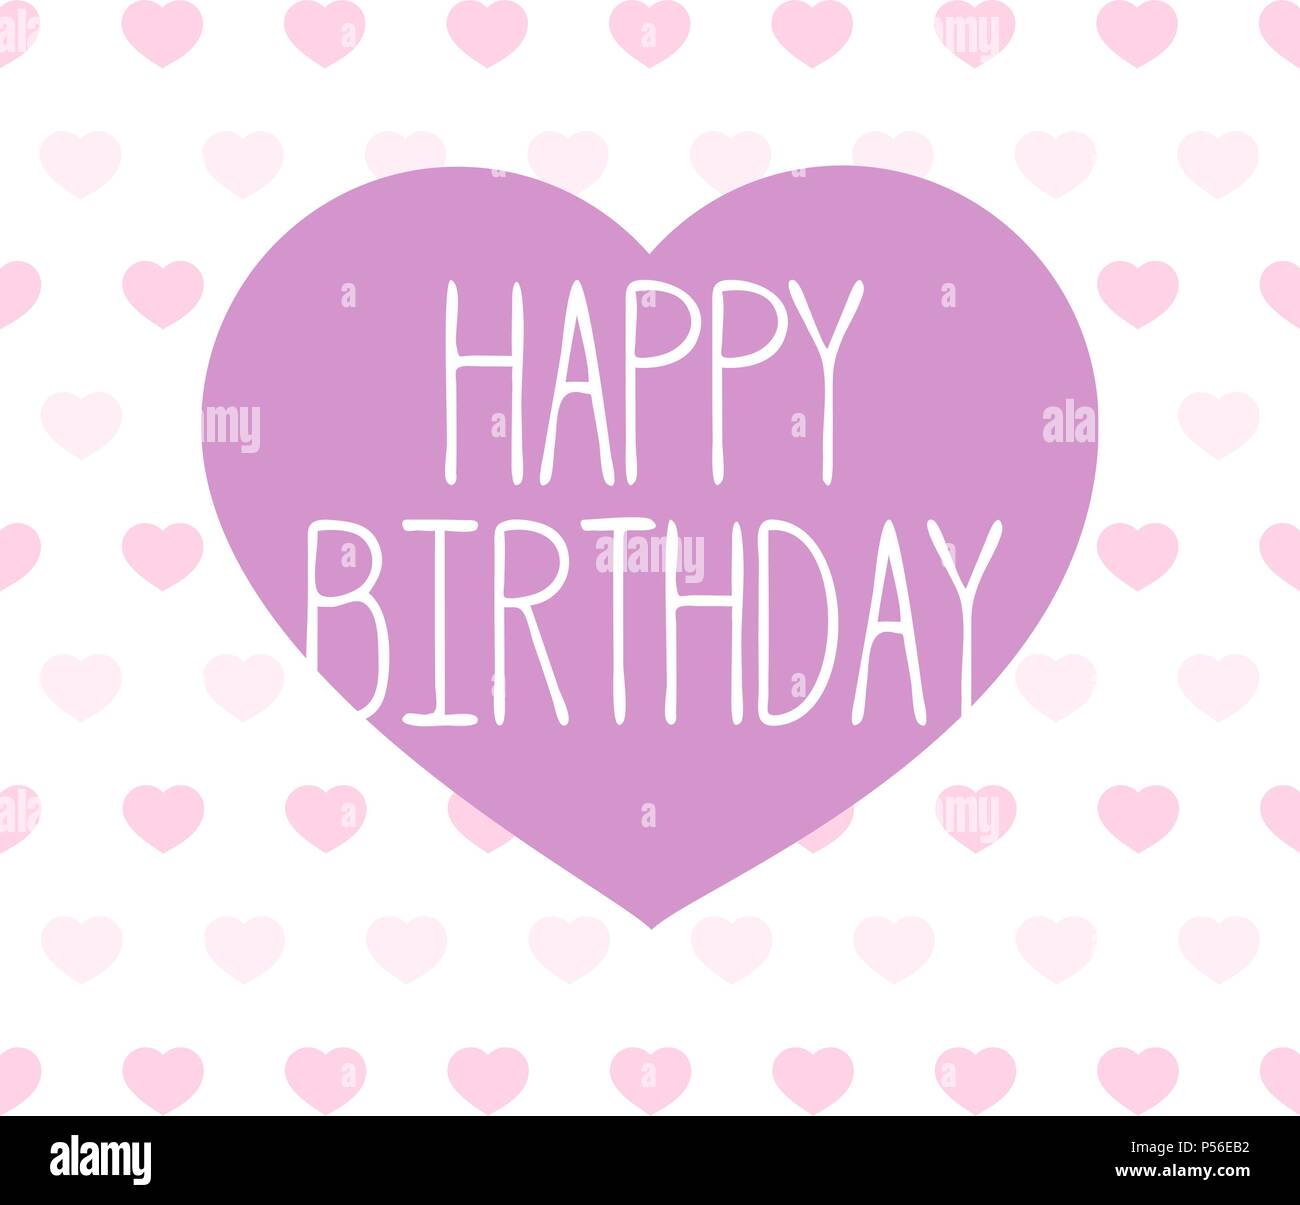 happy birthday greeting card illustration with heart shapes Stock Vector